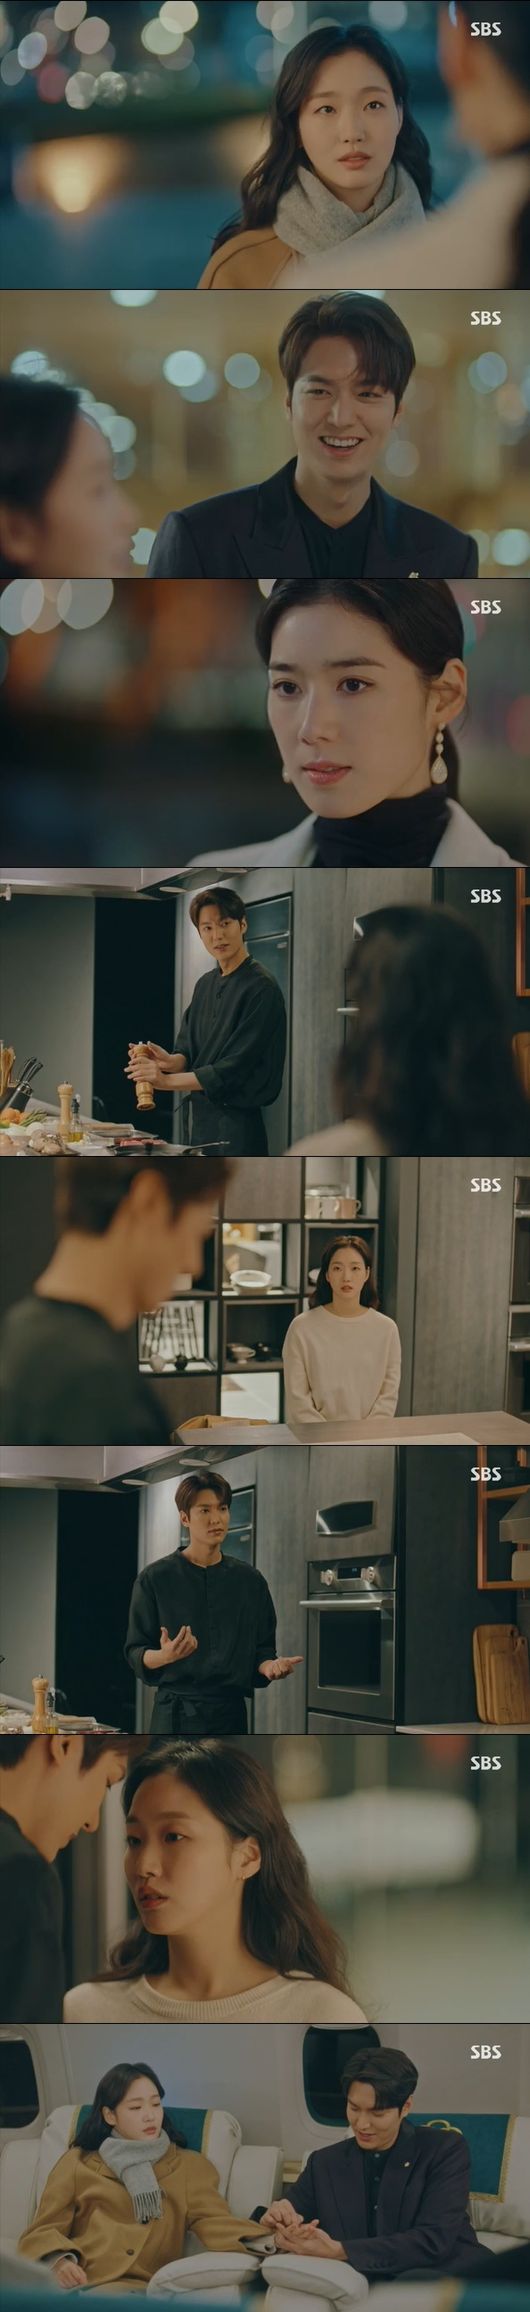 The King Lee Min-ho and Kim Go-eun reunitedIn SBSs The King: The Lord of Eternity, which was broadcast on the afternoon of the 2nd, Lee Min-ho and Kim Go-eun were shown to part ways for a while.Emperor Leeon found out that Jung Tae-eul could not come to Busan because he did not have a car, and he turned the helicopter to Seoul and met two people.The Prime Minister of the Guseo-ryeong (Jung Eun-chae) heard reports that the emperors helicopter had been granted emergency landing permits, and the three first met.Im in trouble, of course, Im going to report it, said Lee. Where is the service in the day? He said, Your Majesty is my country.Korean Empire Prime Minister is a written book, he said.Jung Tae-eul said, Prime Minister fan, and Koo Seo-ryong asked, I am so young and beautiful.I am a traveler, and I am honored to see you like this, and I will leave soon. Korean Empire is like a fairy tale, said Jeong Tae-eul.I am the first Korean Empire, but I am very good at my country.Later, Igon moved with Jung Tae-eul, and Guseo-ryeong felt a lot of jealousy. Guseo-ryeong recalled Lee, who laughed brightly at the moment, saying, I laugh because of you, and you laugh at that moment.Lee and Jung Tae-eul talked while writing on each others palms in the middle of the move, and Cho Young (Woo Do-hwan) and Imperial House of Japan officials were amazed at this.Igon cooked himself for Jung Tae, and Jung Tae-eun said, I was lonely in South Korea today, and there was no way to prove that I was me.Thank you for coming to pick me up, he said.Lee said, Come here for a while, look at me. He kissed his forehead to Jung Tae-eun and smiled, I want to give you Tsudamtsudam, but I do not have a hand.Igon said of the wound on his neck, The wound that killed my father, and the desire of the person who strangled my neck was drawn to my neck, so it was big in the tears of the palace.I hope you dont feel sorry for me, he said.Jung Tae-eul said, Are you going to show me your ID card? I have to go now. Lee said, I will not send you, but I have to live here.Lee said, I was not able to give it to you if you really showed it.Jung Tae-eul said, My ID is right. But does it make sense? This is definitely mine. Ive been here for 25 years?Someone spilled it, and I dont know if my memory is getting cloudy and I can recognize it, because hes the beginning or the end of all this.It will be difficult to solve, but you are the answer I was looking for, and whoever it is, which World person will solve, do not say goodbye to yourself. Shortly afterwards, the Old Seoryeong Prime Minister called an emergency NSC (National Security Council) to Japans unimportant move.There may be a war between Korean Empire and Japan.The Old Testament Prime Minister prepared for war, and Igon said, If Japan comes out so frankly, we should be honest, too.Japan can not enter our territorial waters 1cm or 1mm. Giving Jeong Tae-eun his ID, Igon said, I dont believe it, but I am the commander-in-chief. Imperial House of Japan wears military uniforms in honorable moments, meaning to win.Will you wait? asked Jeong Tae-eul. Lets see you again, Igon.I thought it was a name I had not called, but it was a name I had only called you, he promised to meet the next meeting.Jung Tae-eul, who returned to South Korea Seoul, arrived home, and his father, Jung-in (Jeon Bae-su), said, Did you not go home? Where did you go? Did you lurk?Is Maju taking him with me? Jung Tae-eun, who returned to the detective, focused on his work and recalled Lee. He did not come for a long time, he said.I didnt know what was happening in his World; he was a person beyond it, passing between 1 and 0, he missed.Fortunately, Japan has completely stepped out of the Korean Empire territorial waters and no war has occurred, and the Prime Minister of the Old Testament has announced his official position that he respects the Emperor and wants Japans quick apology.What added to that was going to another World, said Igon, who learned that the reverse Irim (Lee Jung-jin) was alive.I have half of my food, and then he will come to find the half of me. Igon, who came to South Korea, said, How are you? Did you wait?Jung Tae-eun, who was tearful, ran to Lee, and Lee said, The concern of the road is wrong. It is not dangerous to me, but I am dangerous to Jung Tae-eun.Capture the broadcast screen of The King